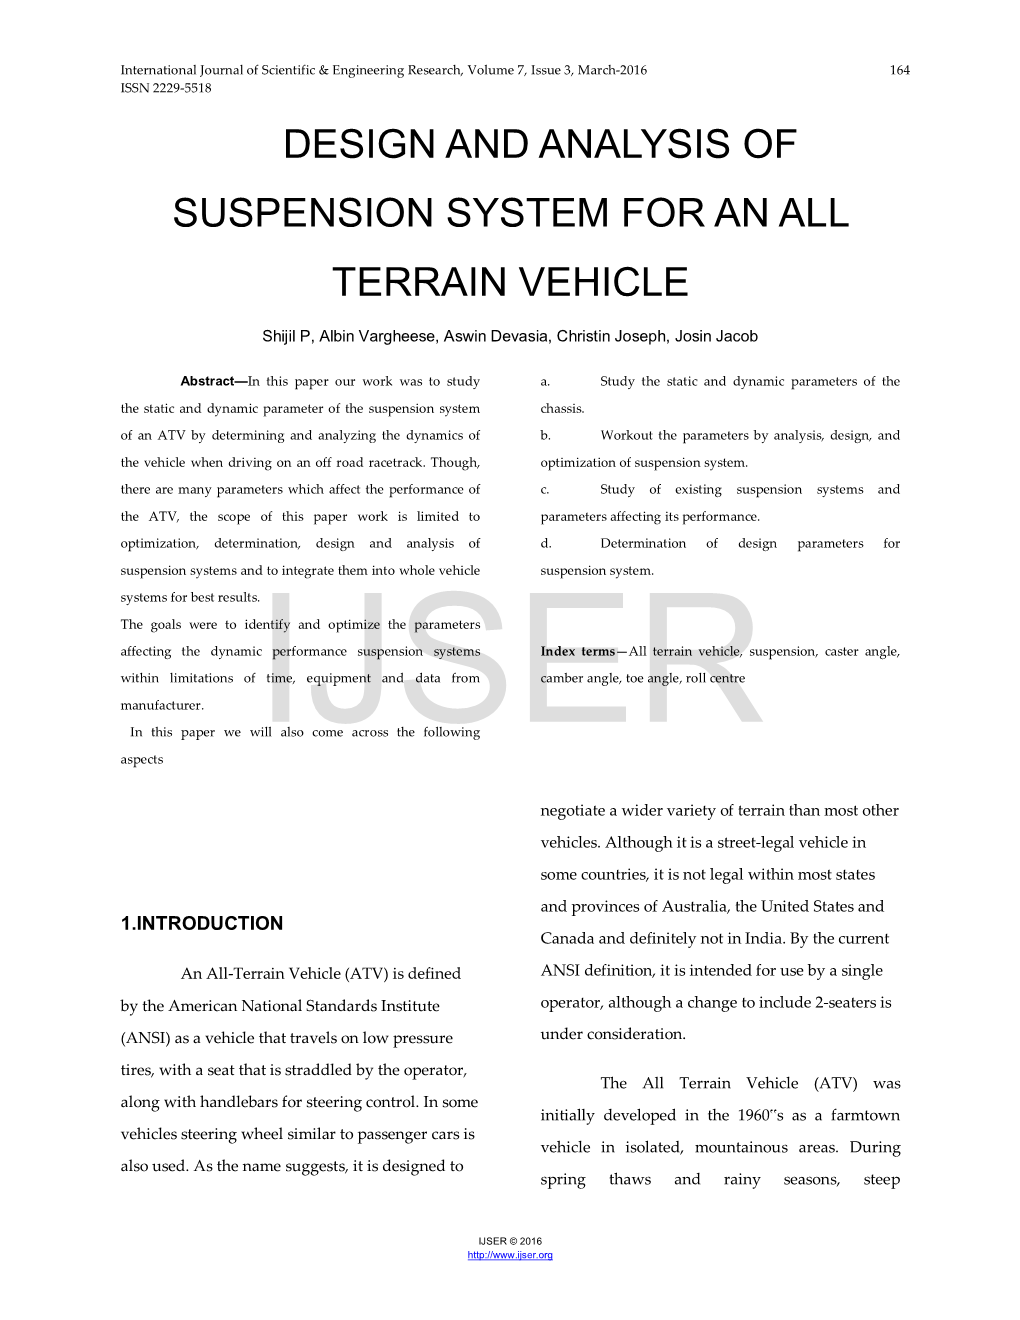 Design and Analysis of Suspension System for an All Terrain Vehicle